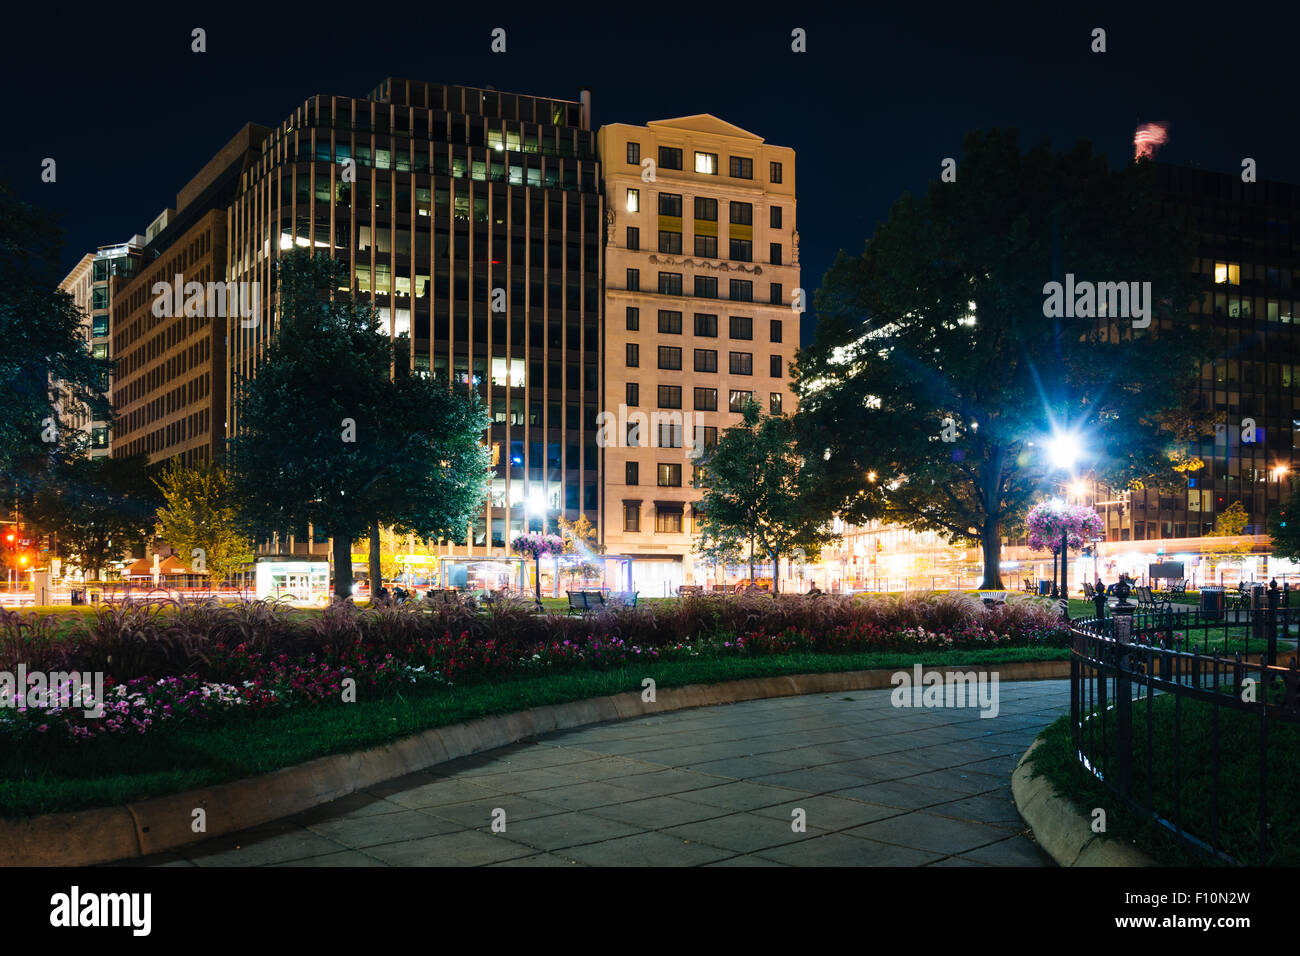 Walkway and buildings at night, at Farragut Square, in Washington, DC. Stock Photo